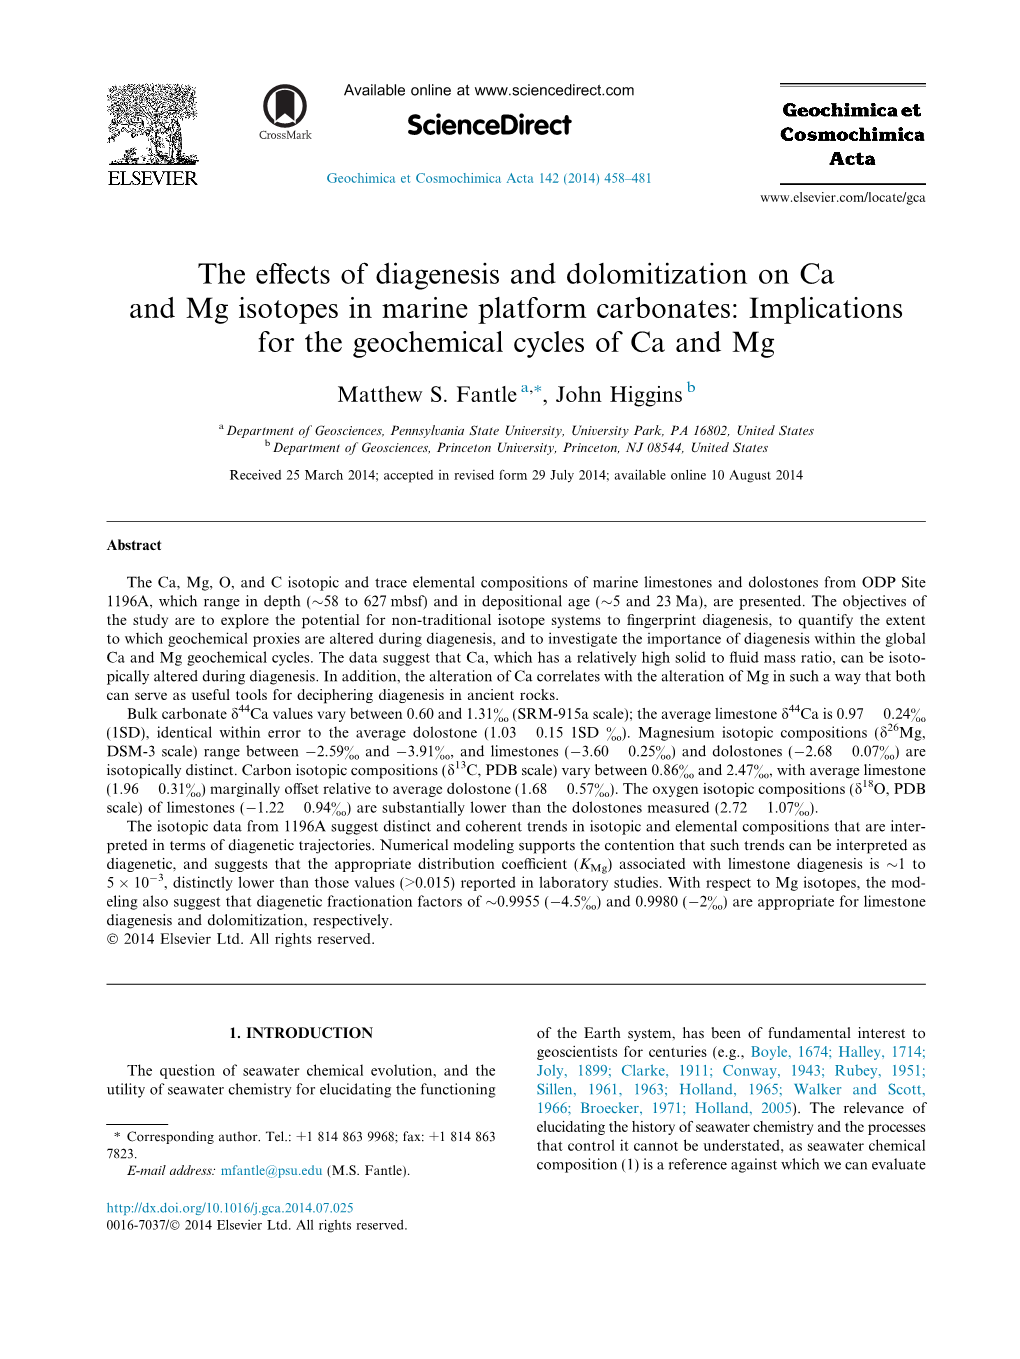 The Effects of Diagenesis and Dolomitization on Ca and Mg